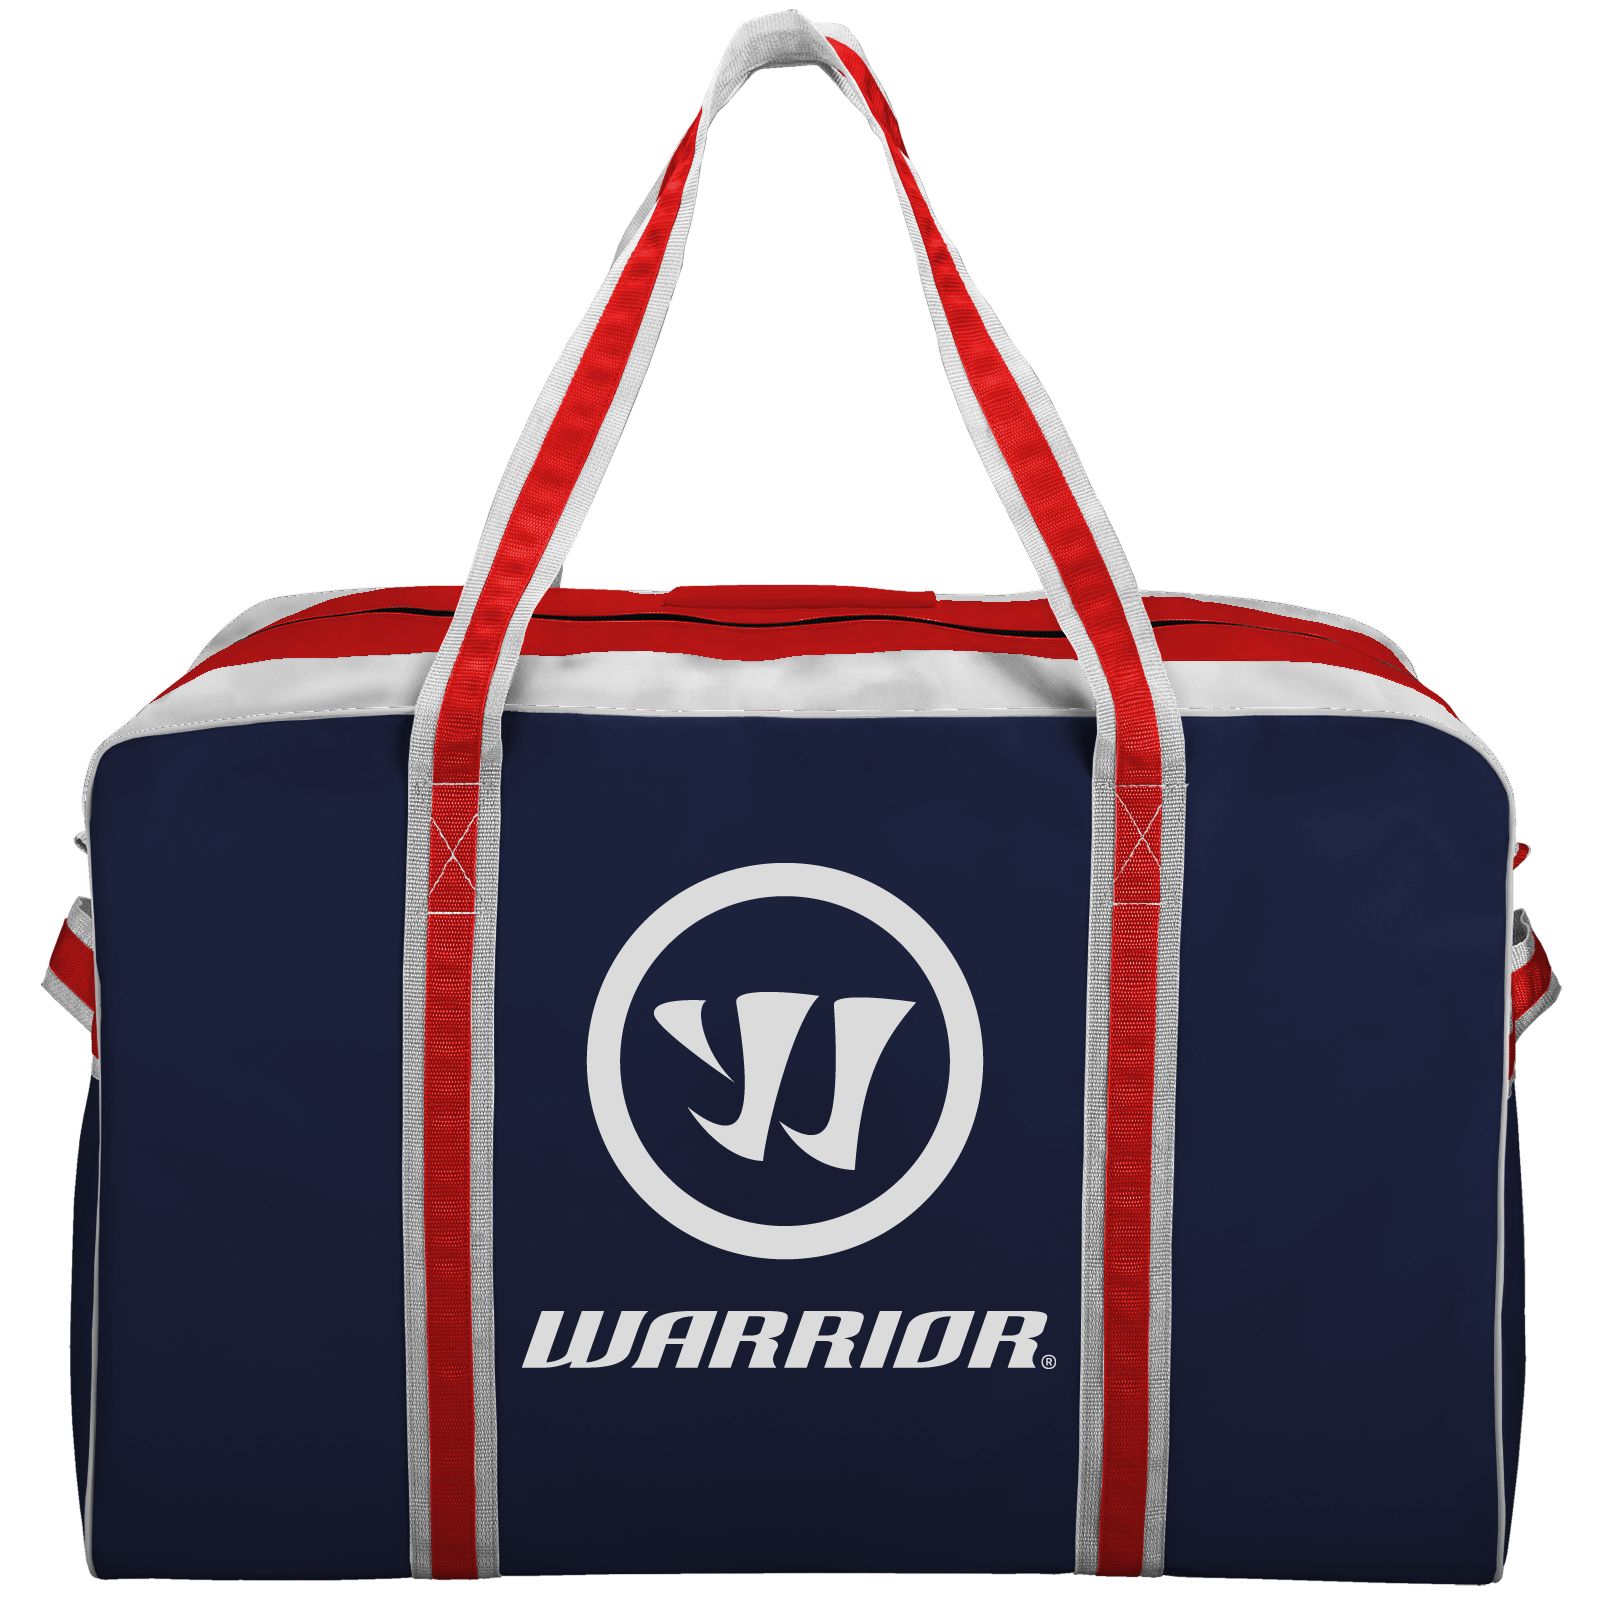 Warrior Pro Bag, Navy with Red & White image number 0